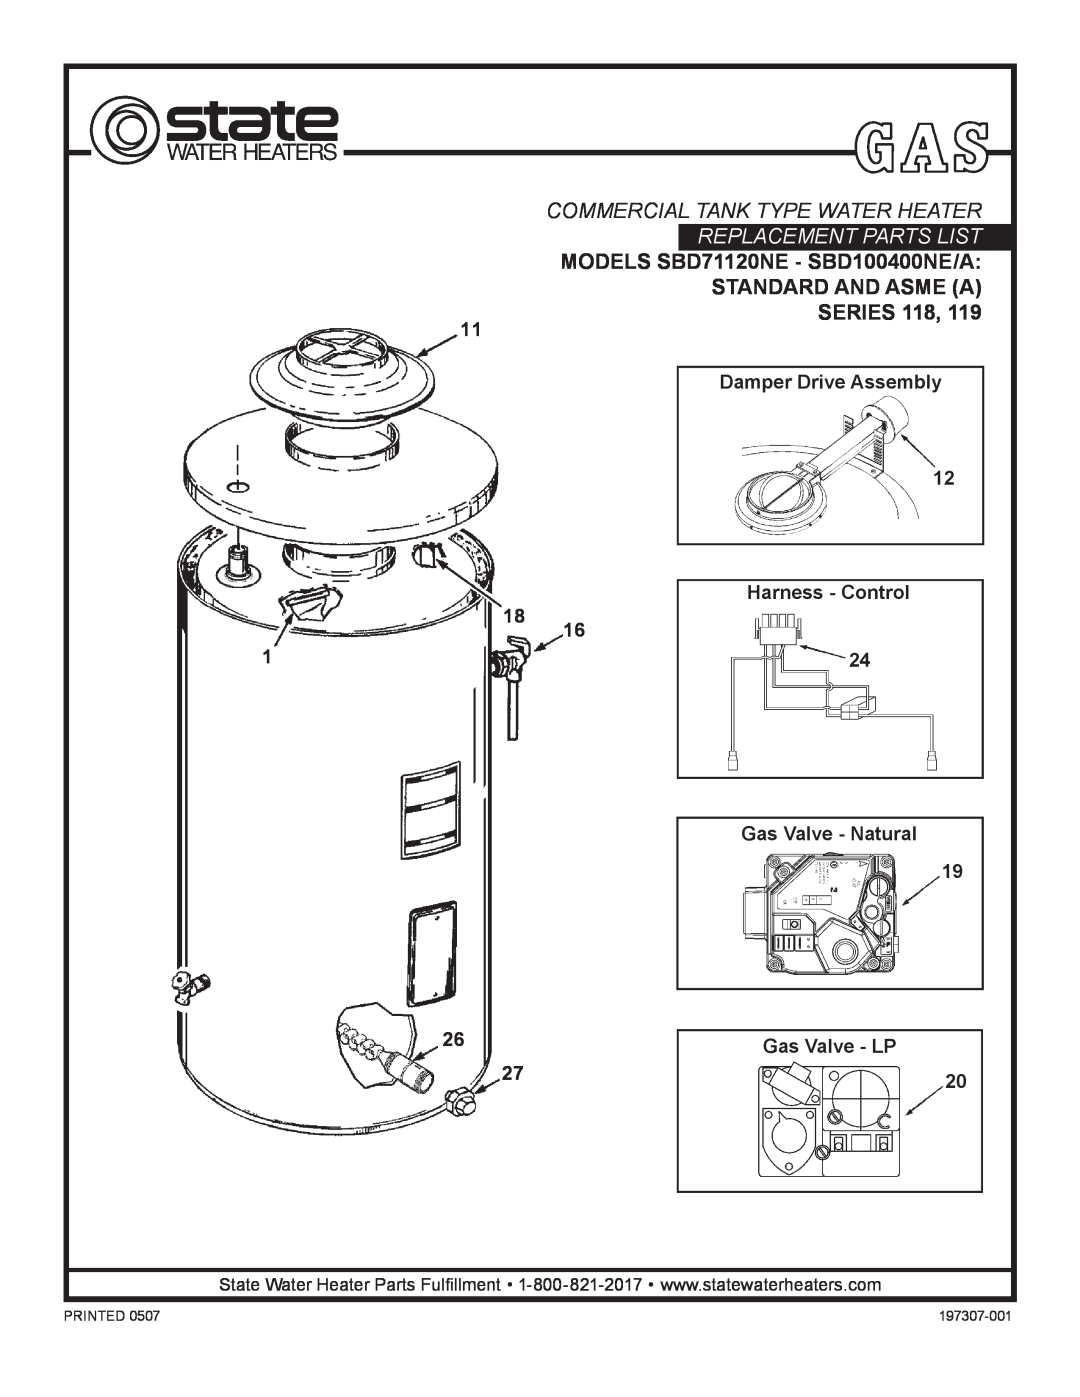 State Industries SBD100400NE/A manual Damper Drive Assembly, Commercial Tank Type Water Heater, Replacement Parts List 